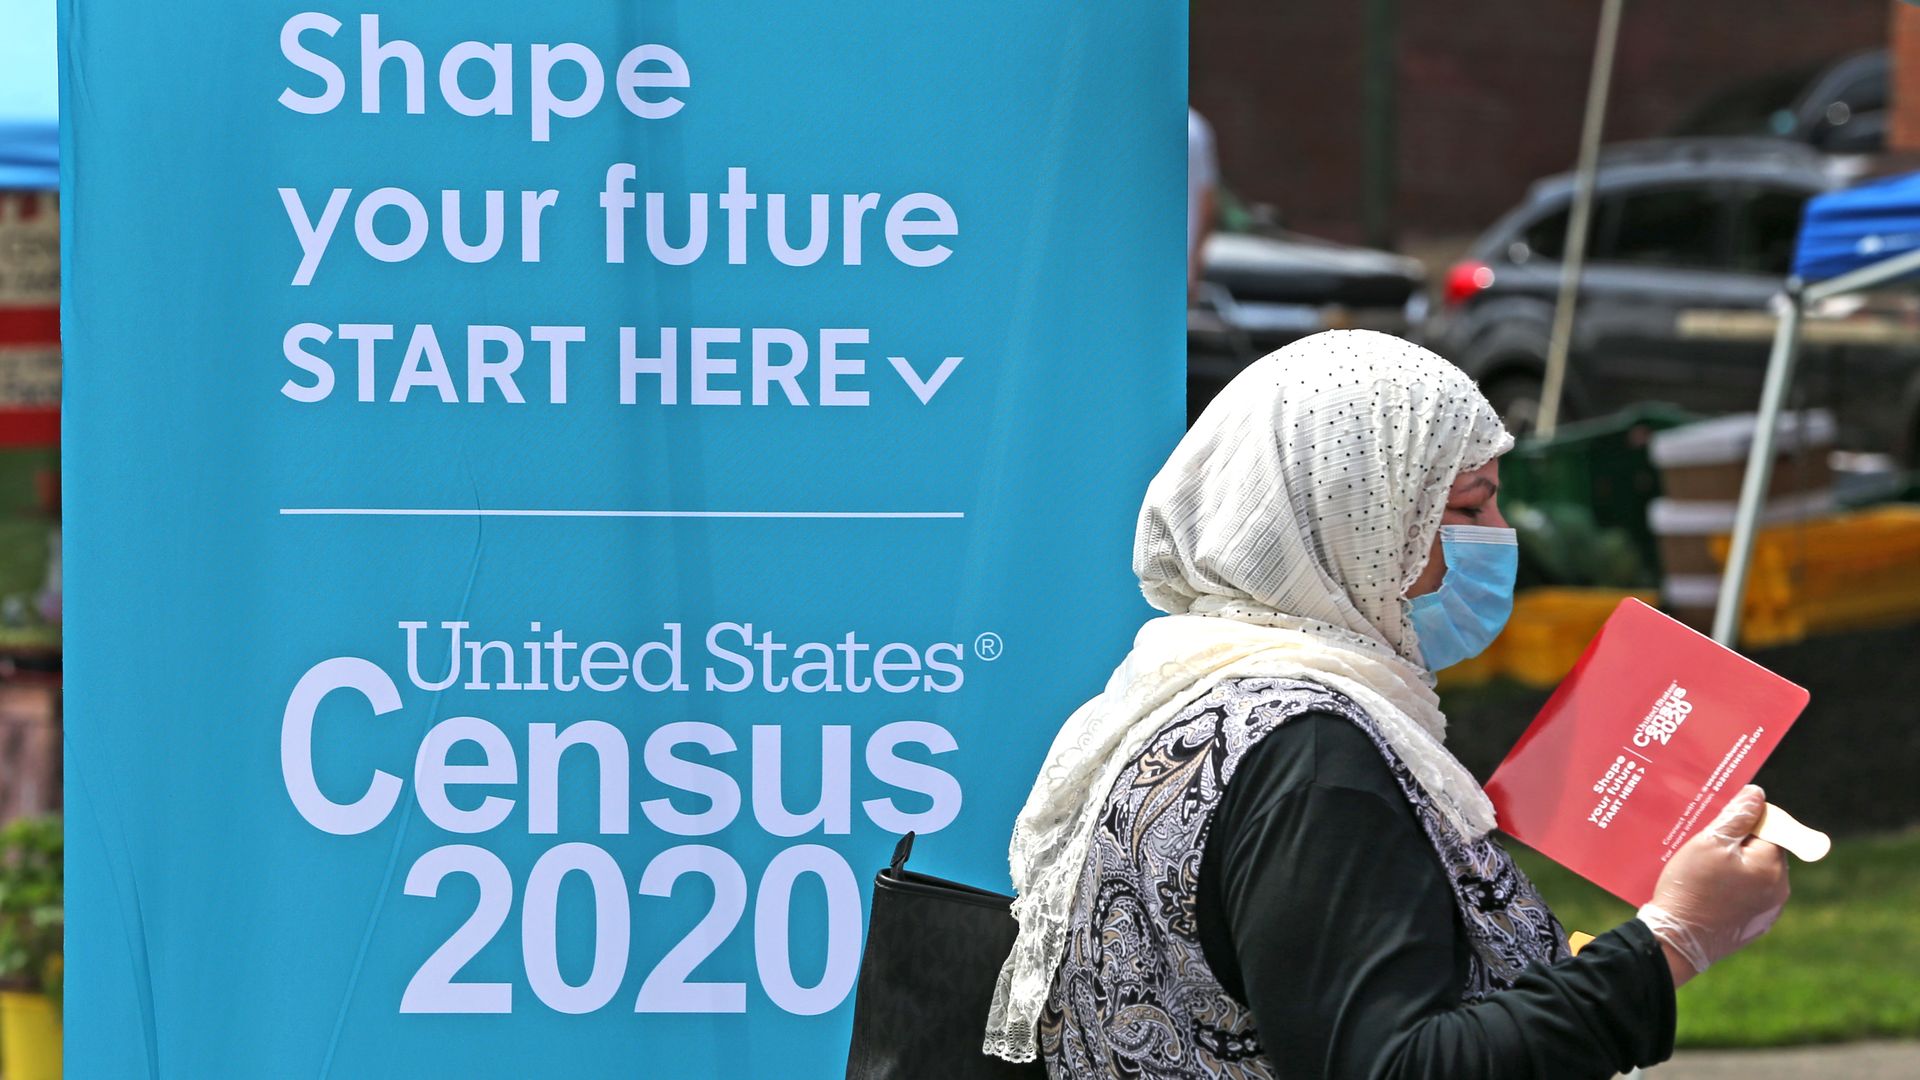  A woman uses a fan to cool off while waiting at a Census 2020 booth at a farmer's market in Everett, MA on July 24